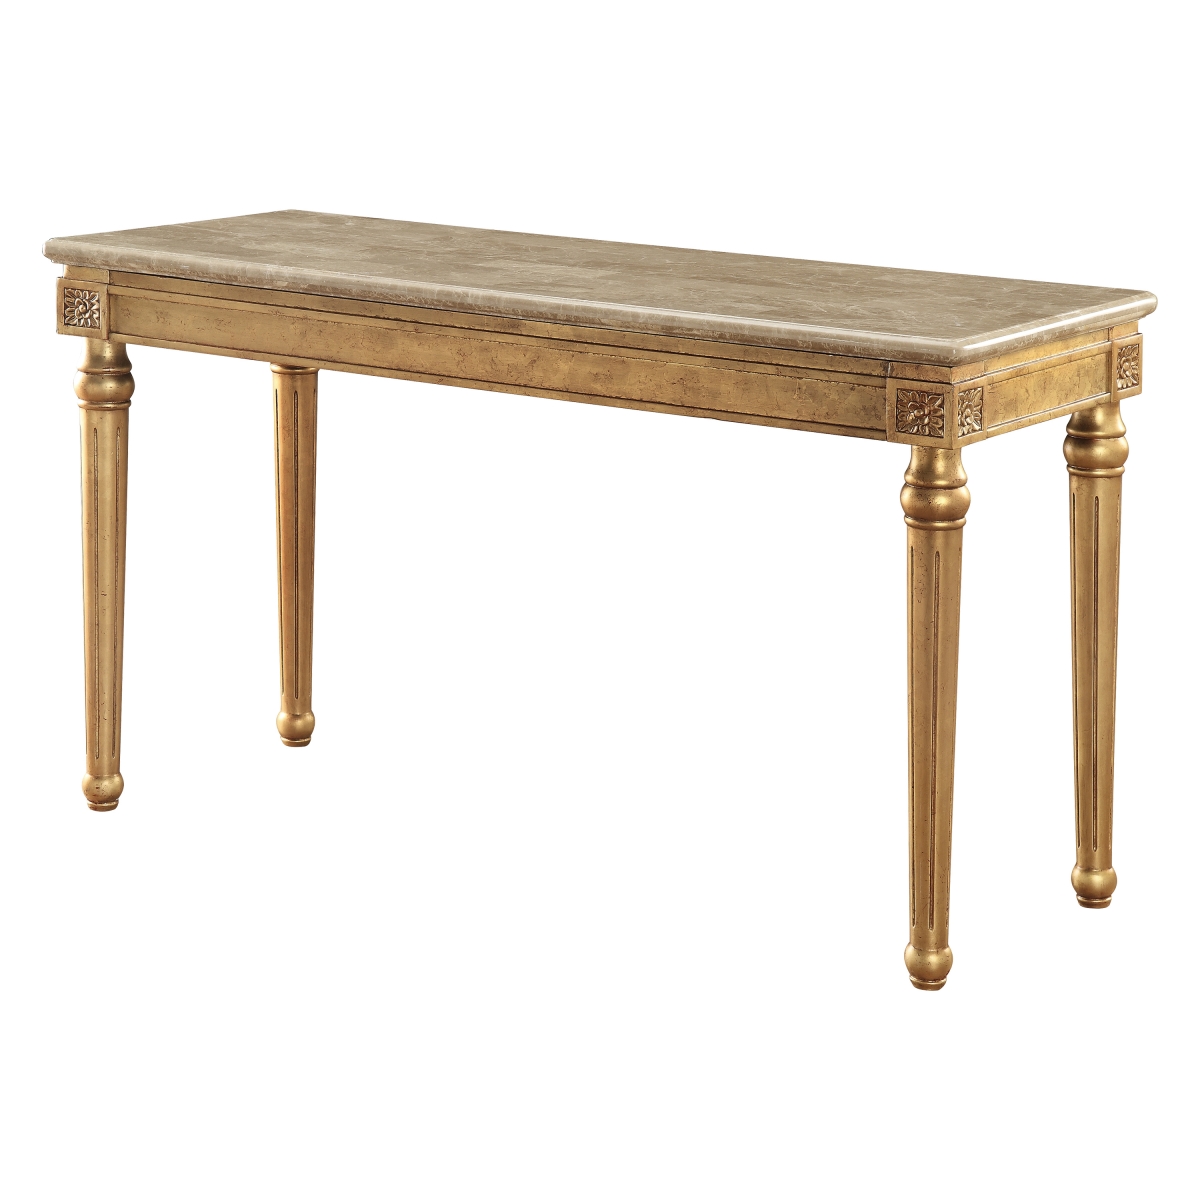 Picture of HomeRoots 347417 22 x 57 x 37 in. Marble Antique Gold Wood Sofa Table